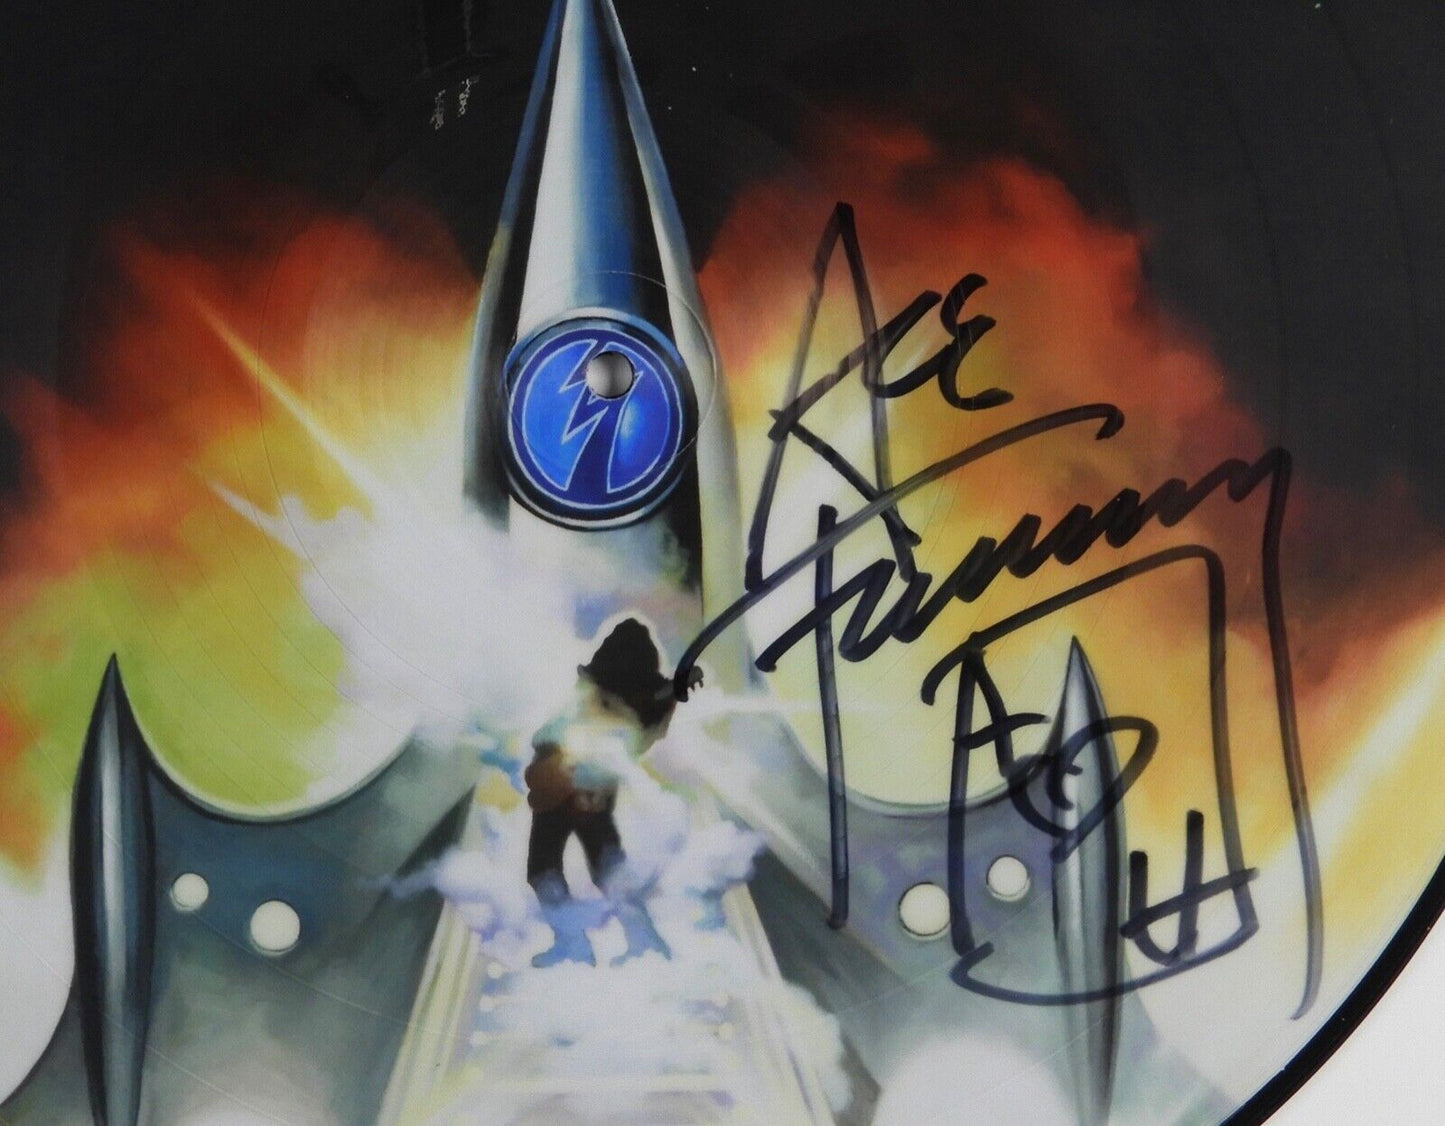 KISS Ace Frehley Autograph Signed Record Album Spaced Invaders Picture Disc